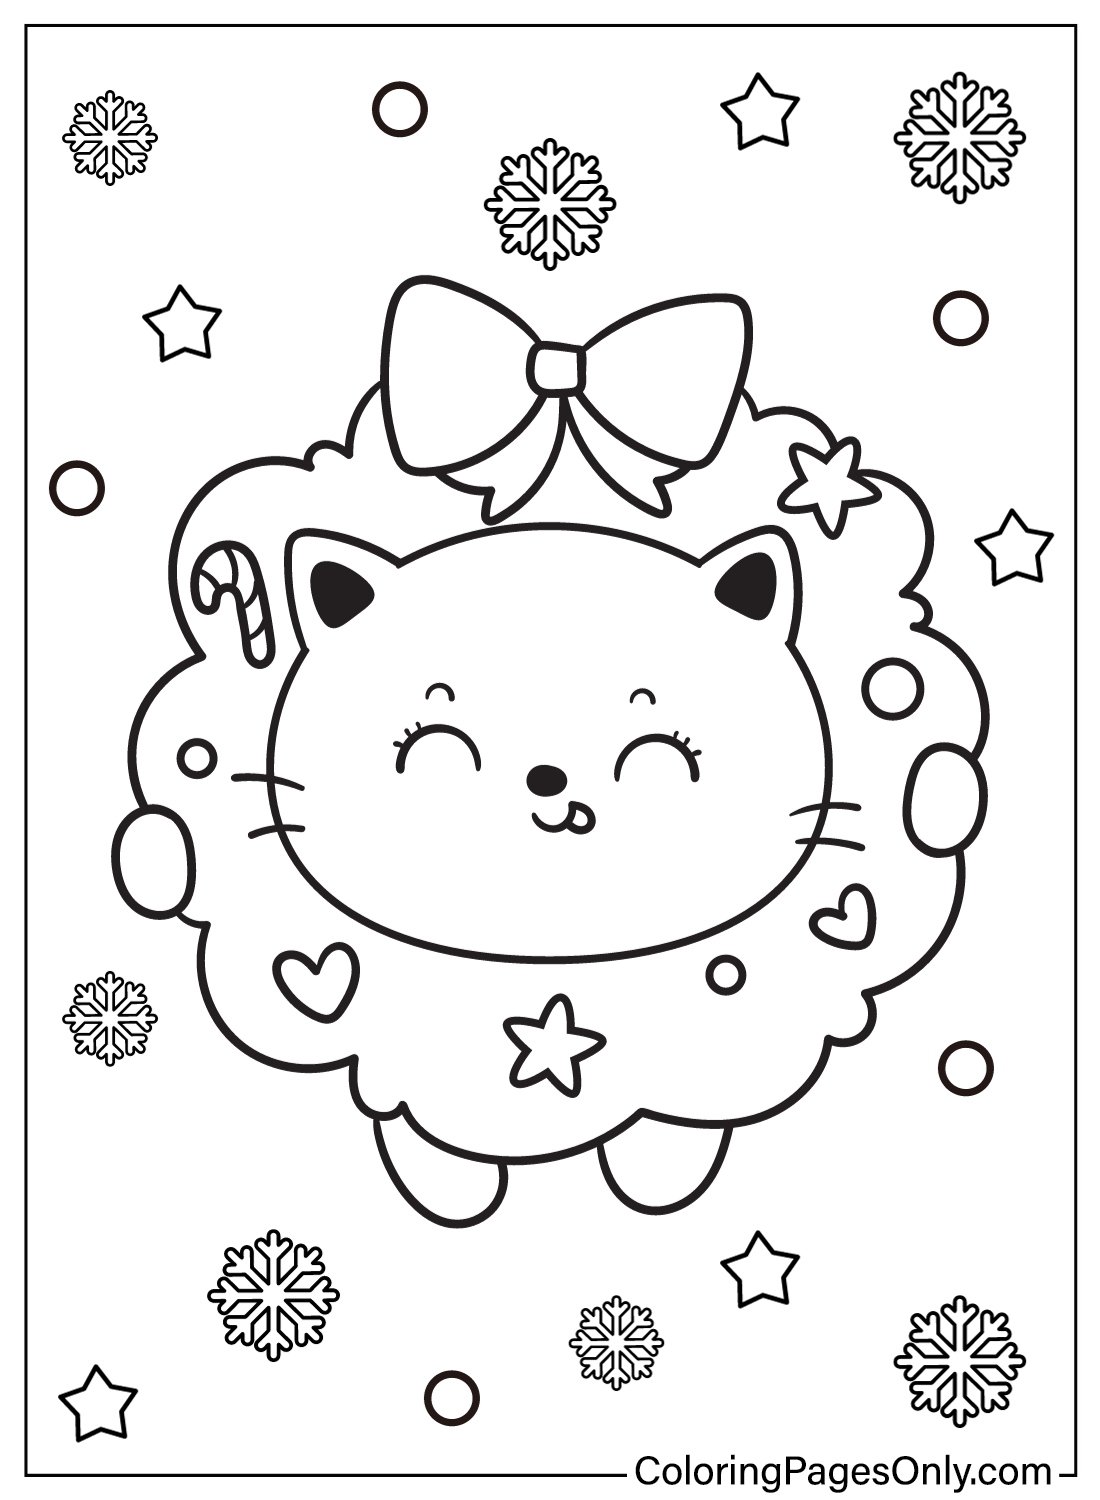 Cat with Christmas Wreath Coloring Pages